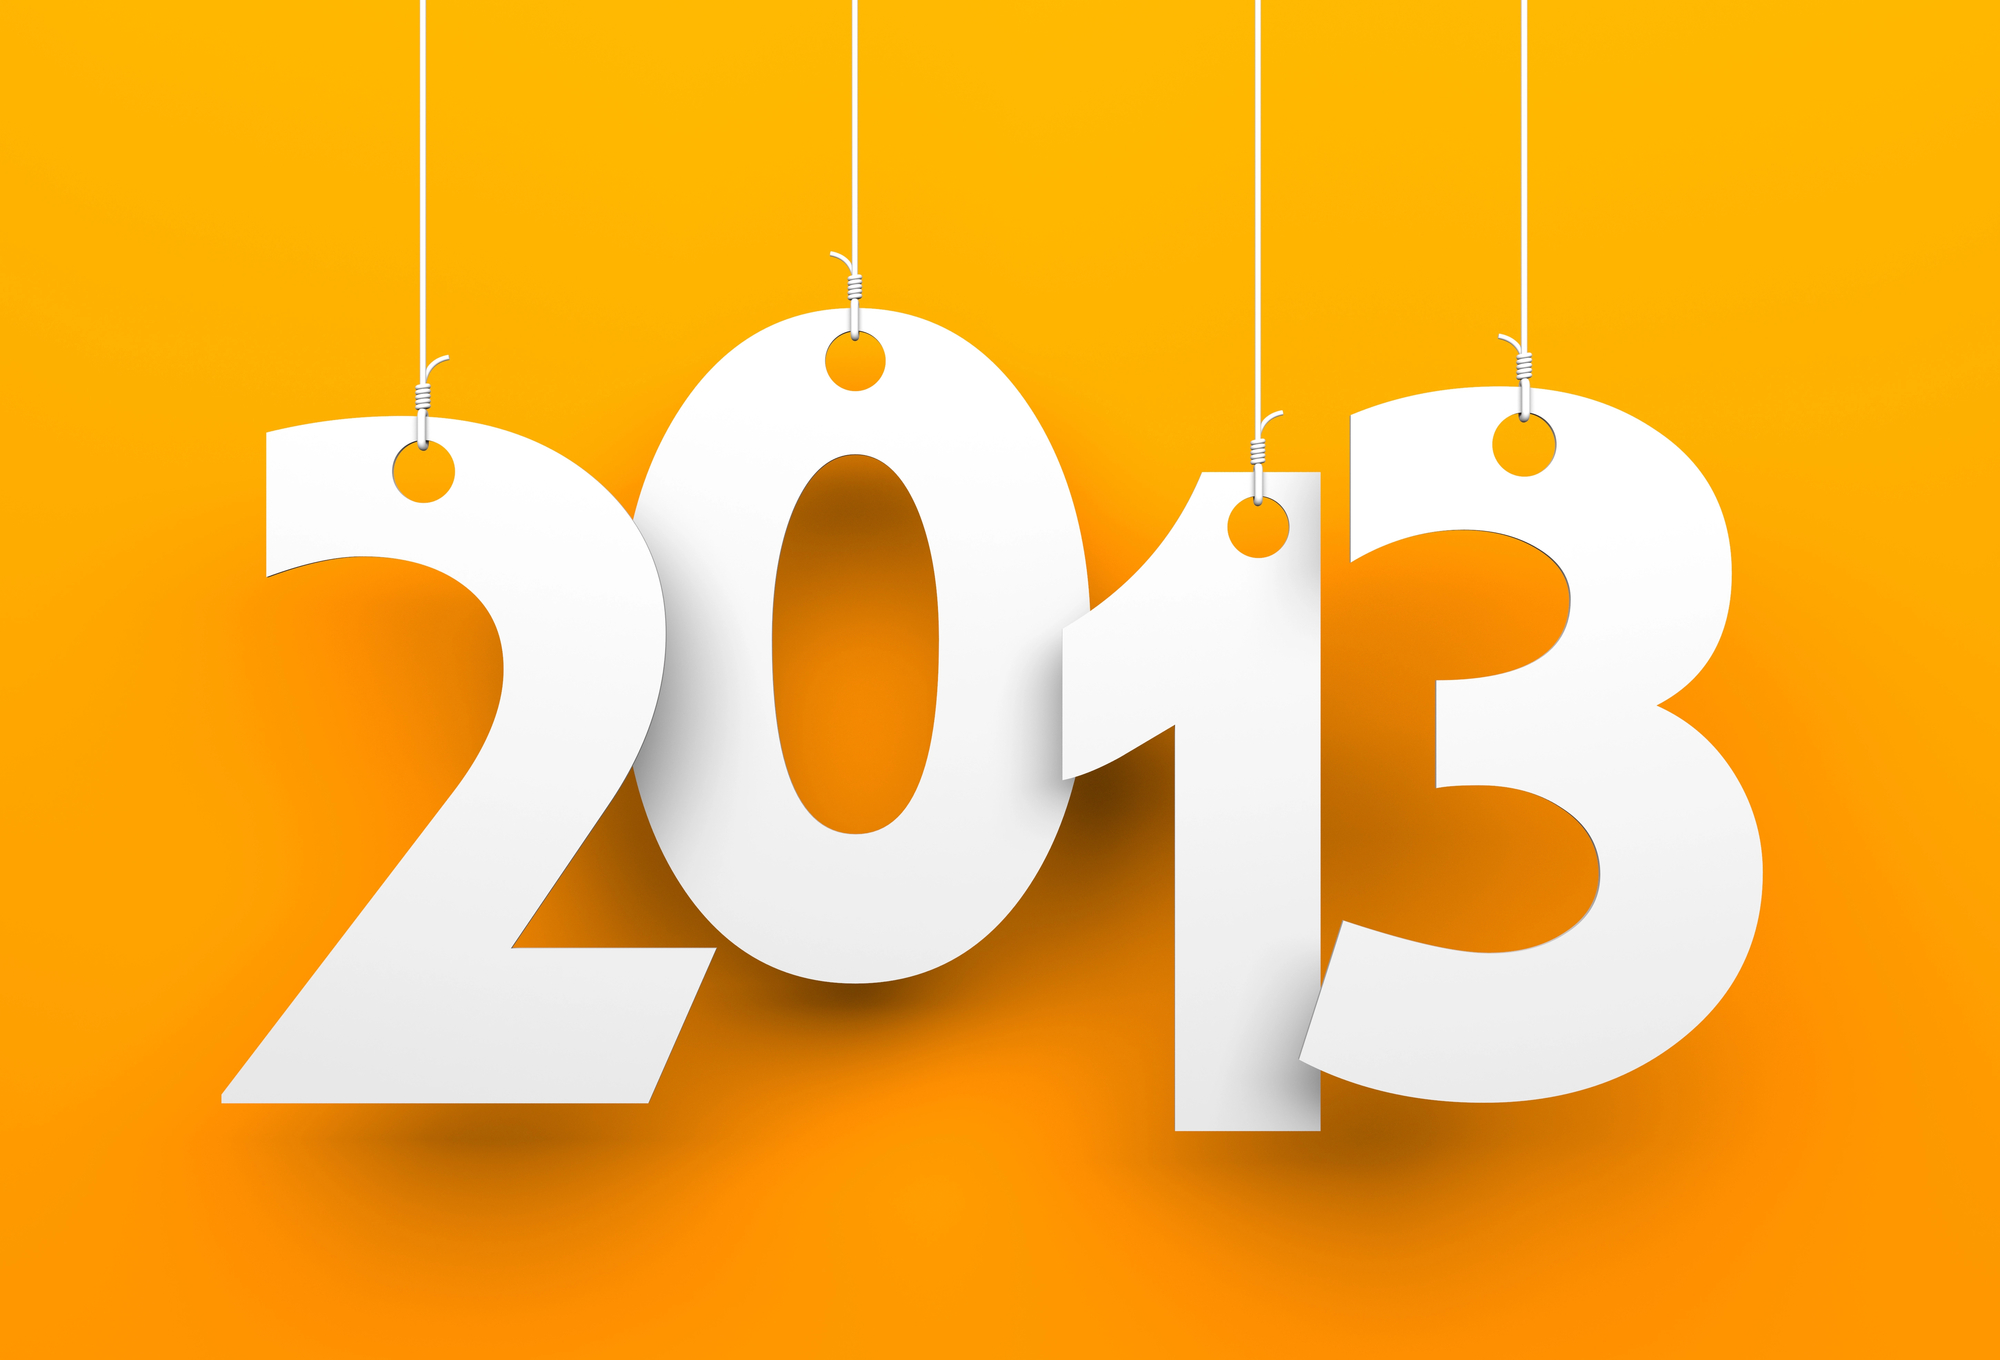 Wordart showing the number 2013